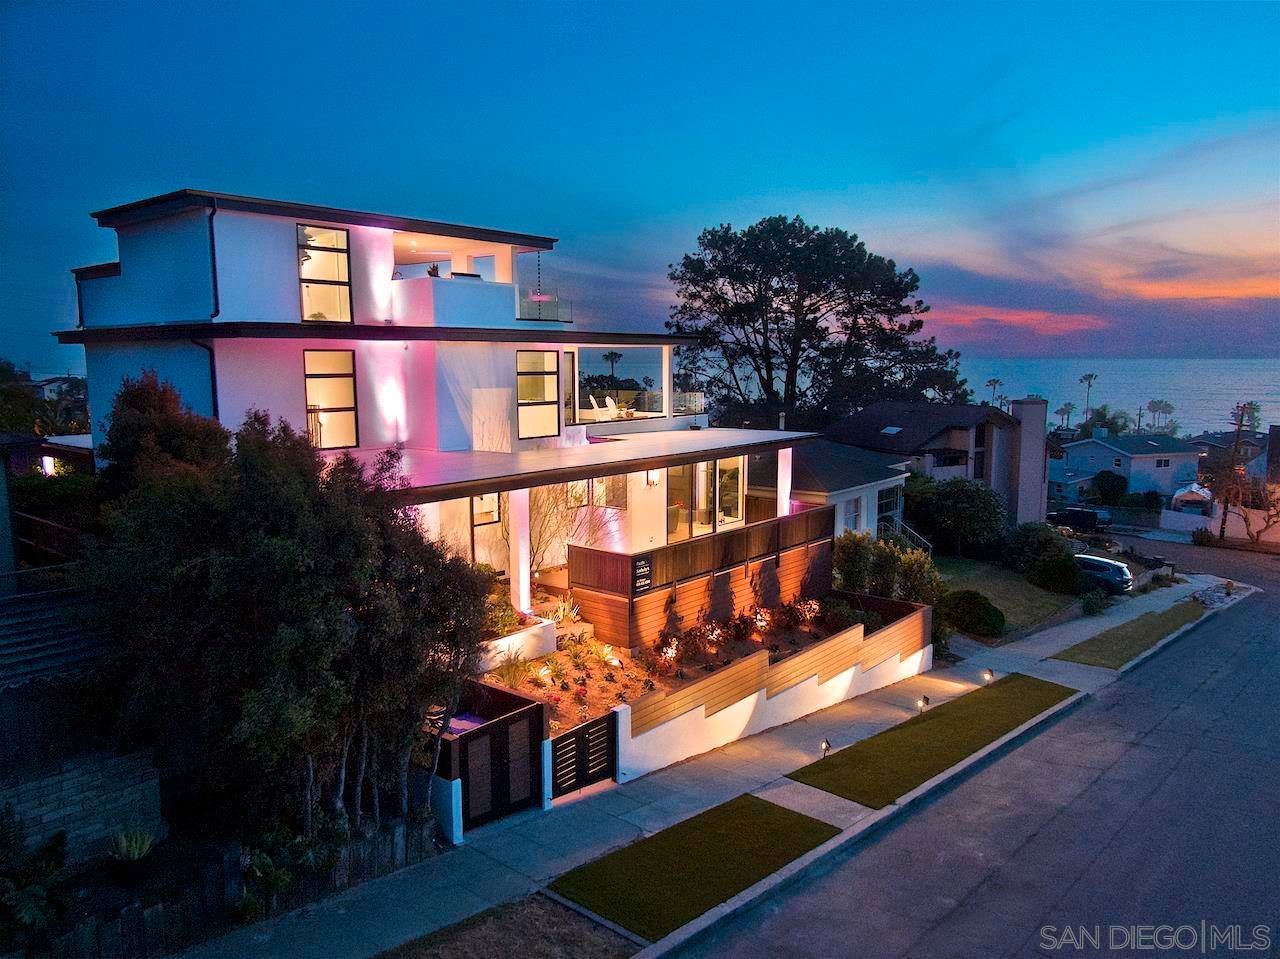 Main Photo: POINT LOMA House for sale : 4 bedrooms : 4415 Piedmont Dr. in San Diego